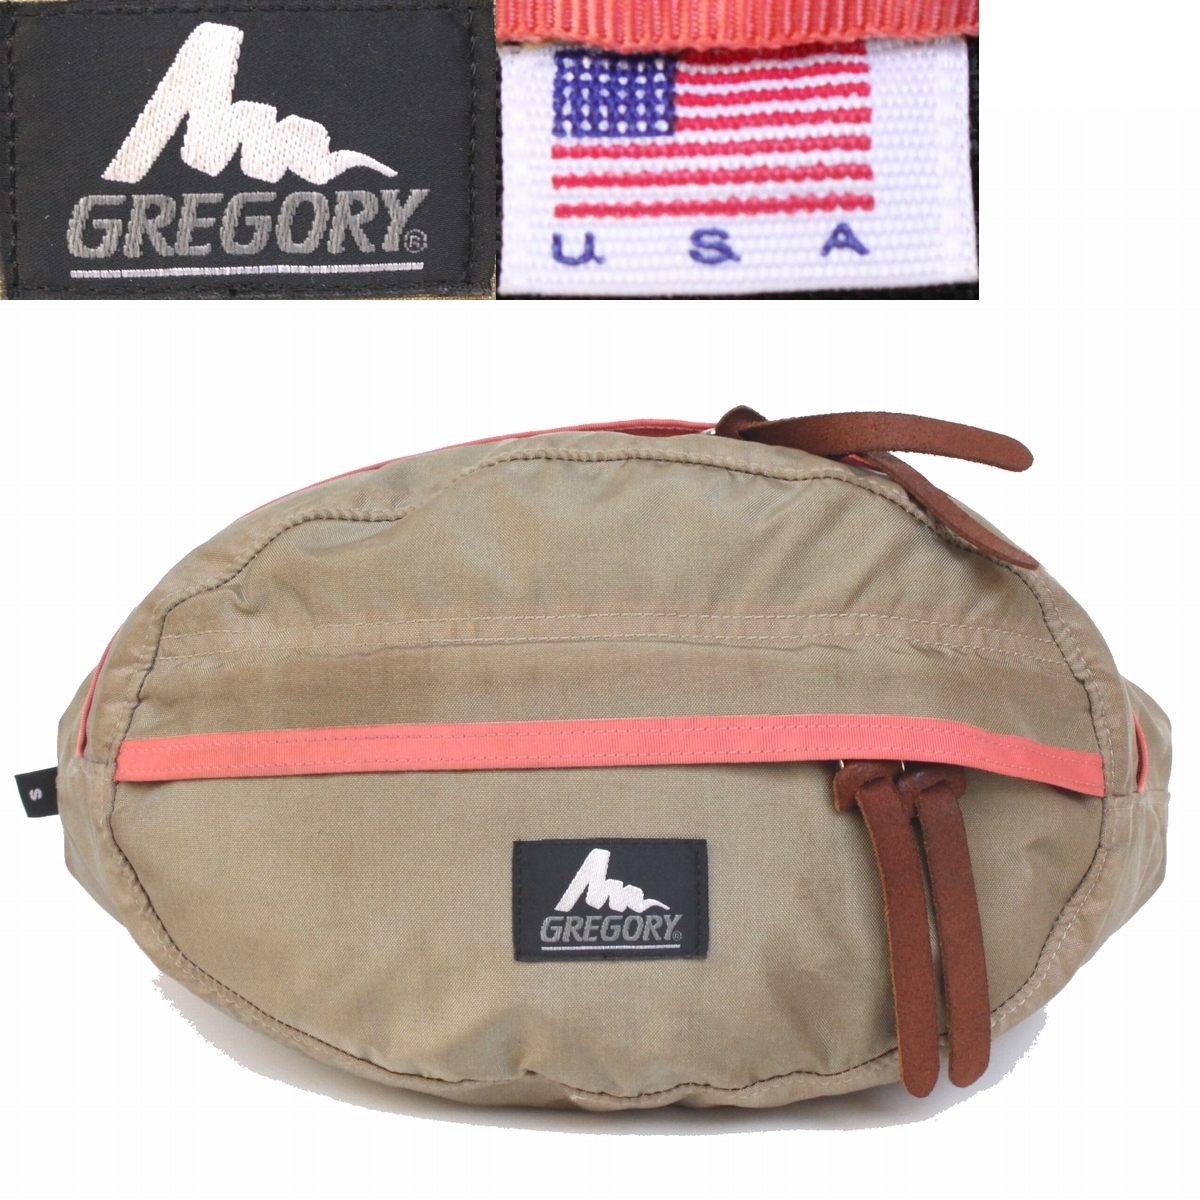 gregory made in usa